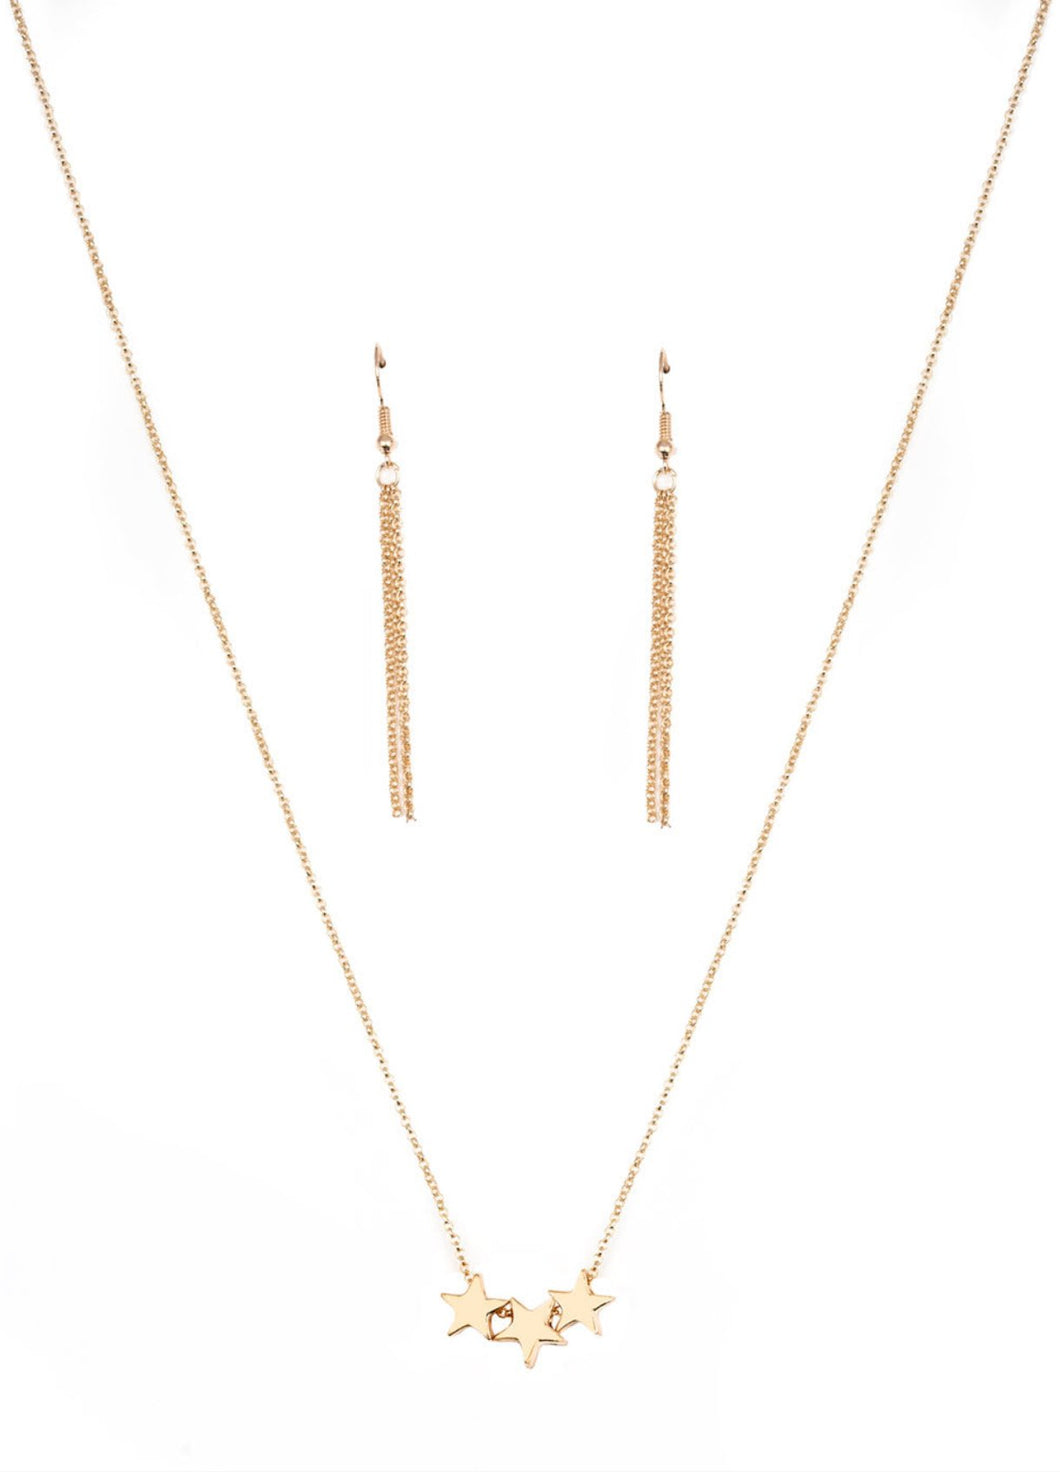 Shoot For The Stars Gold Necklace and Earrings